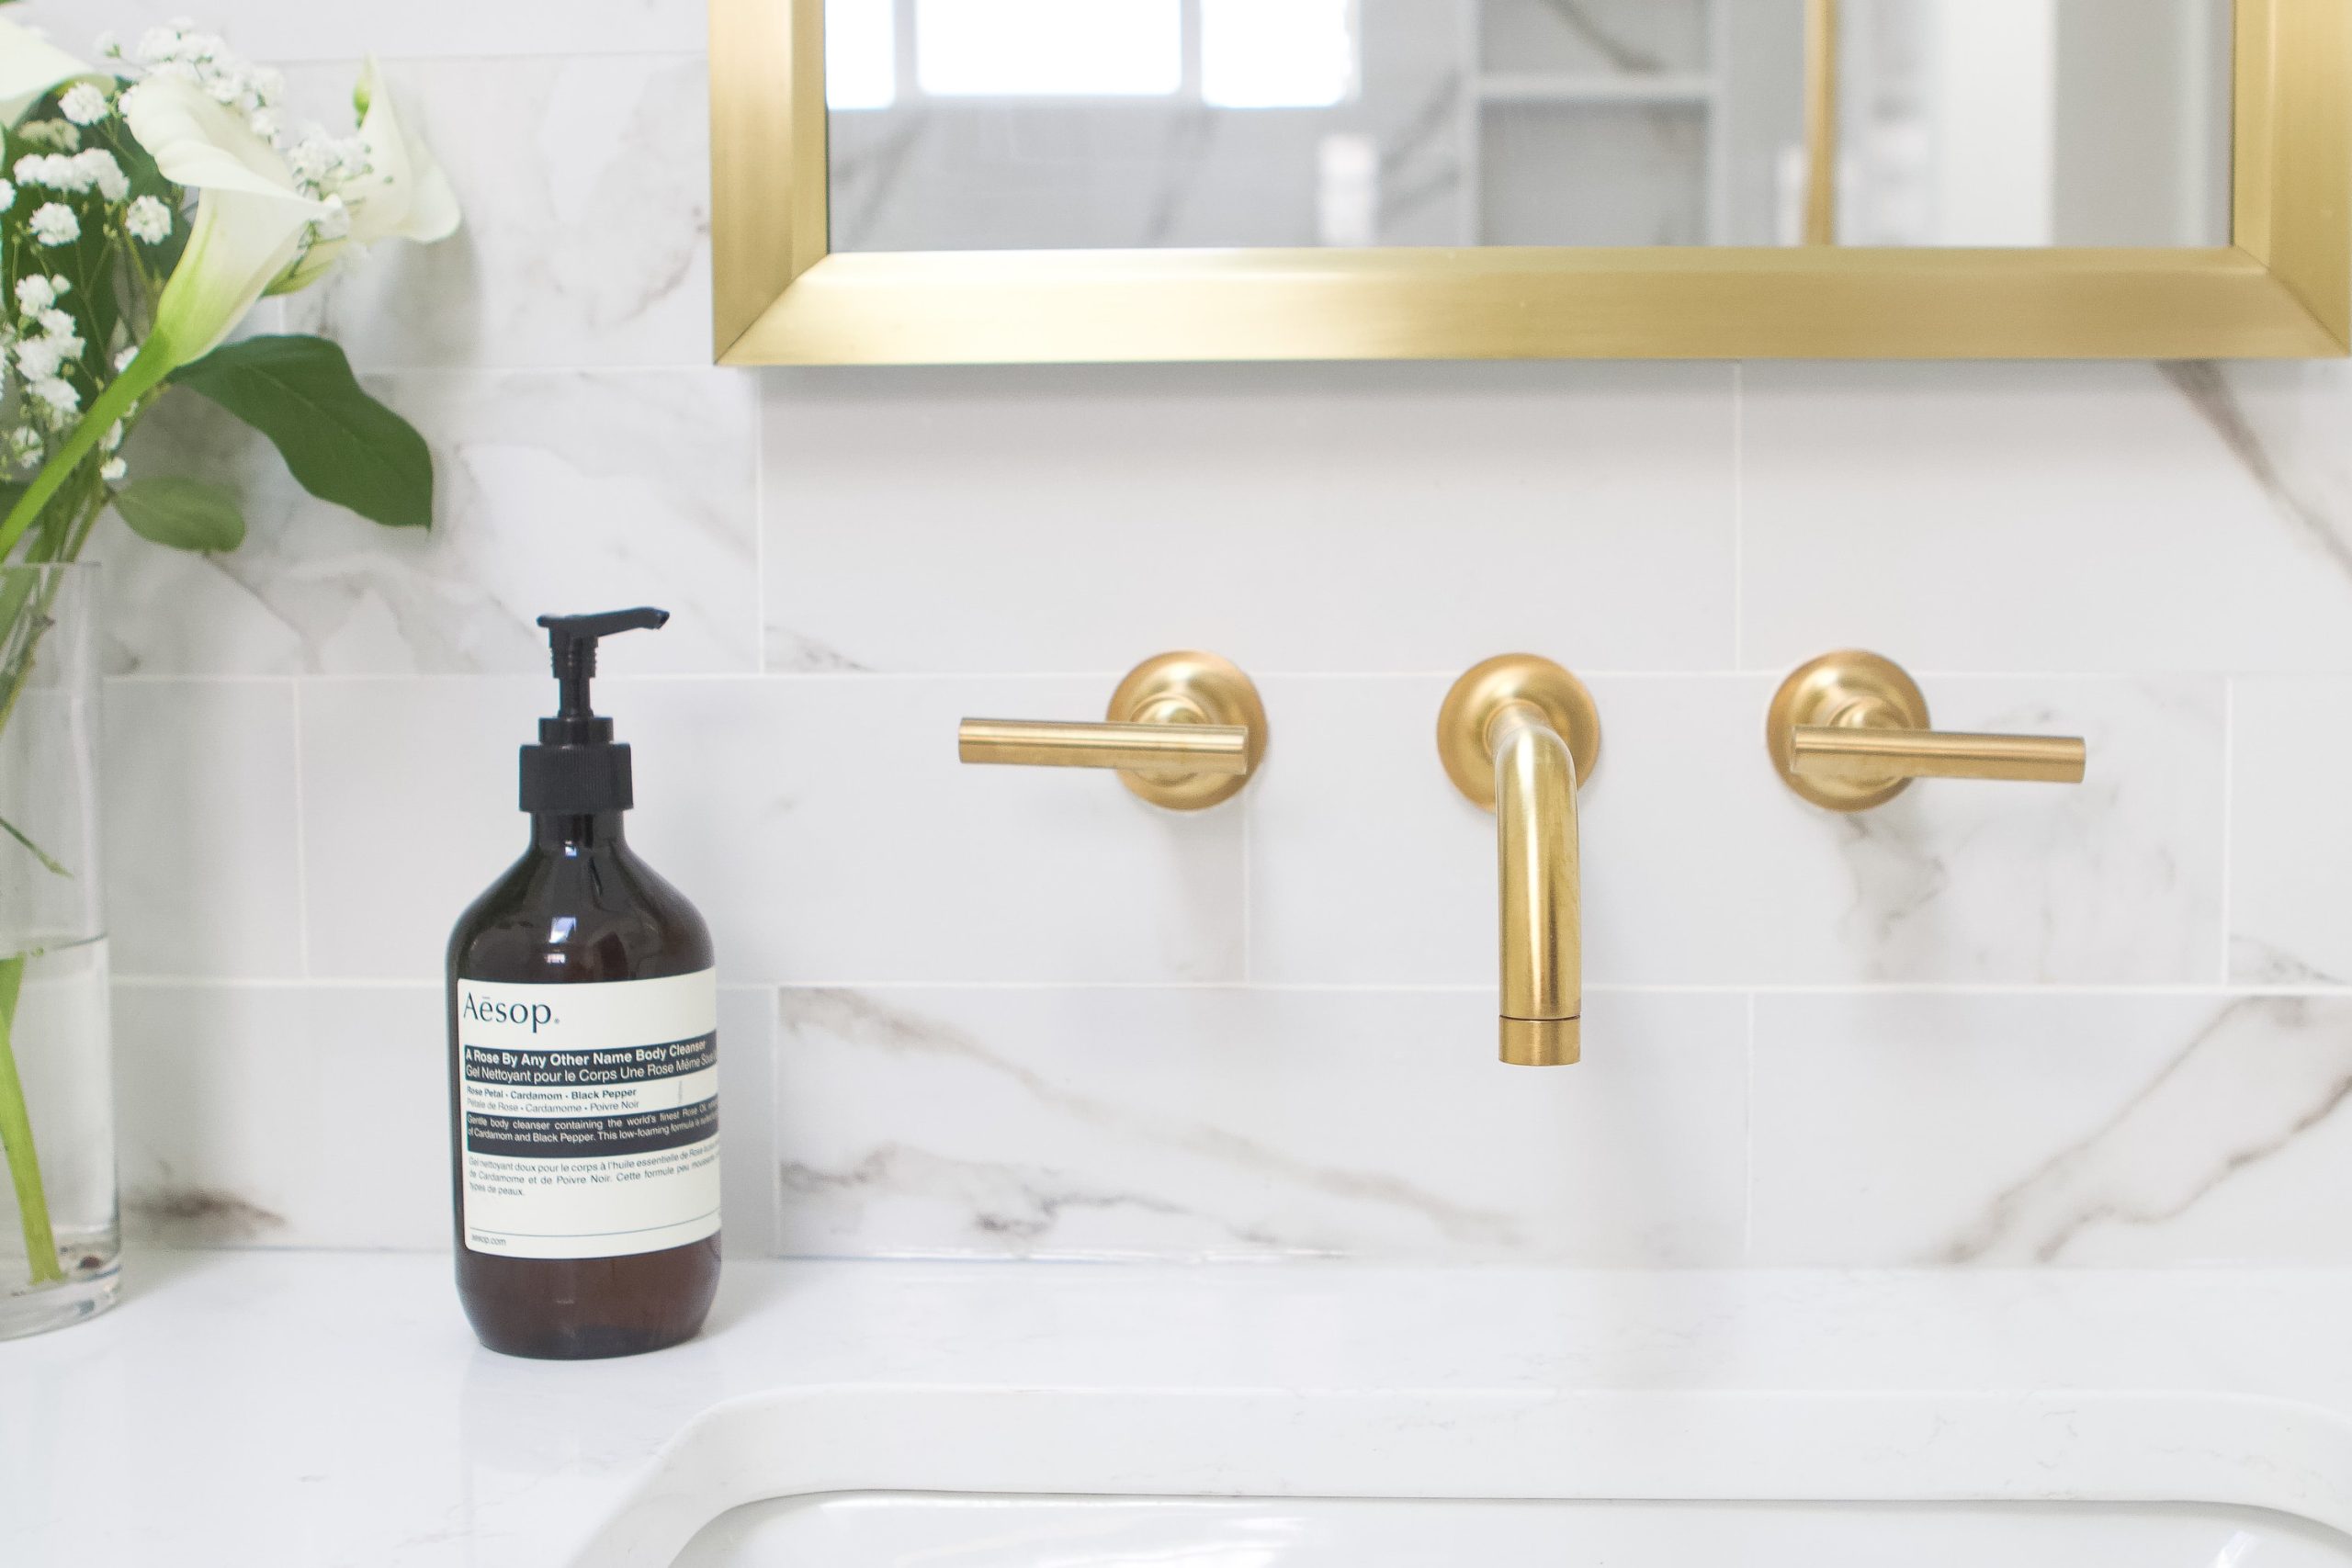 The details in this modern bathroom makeover